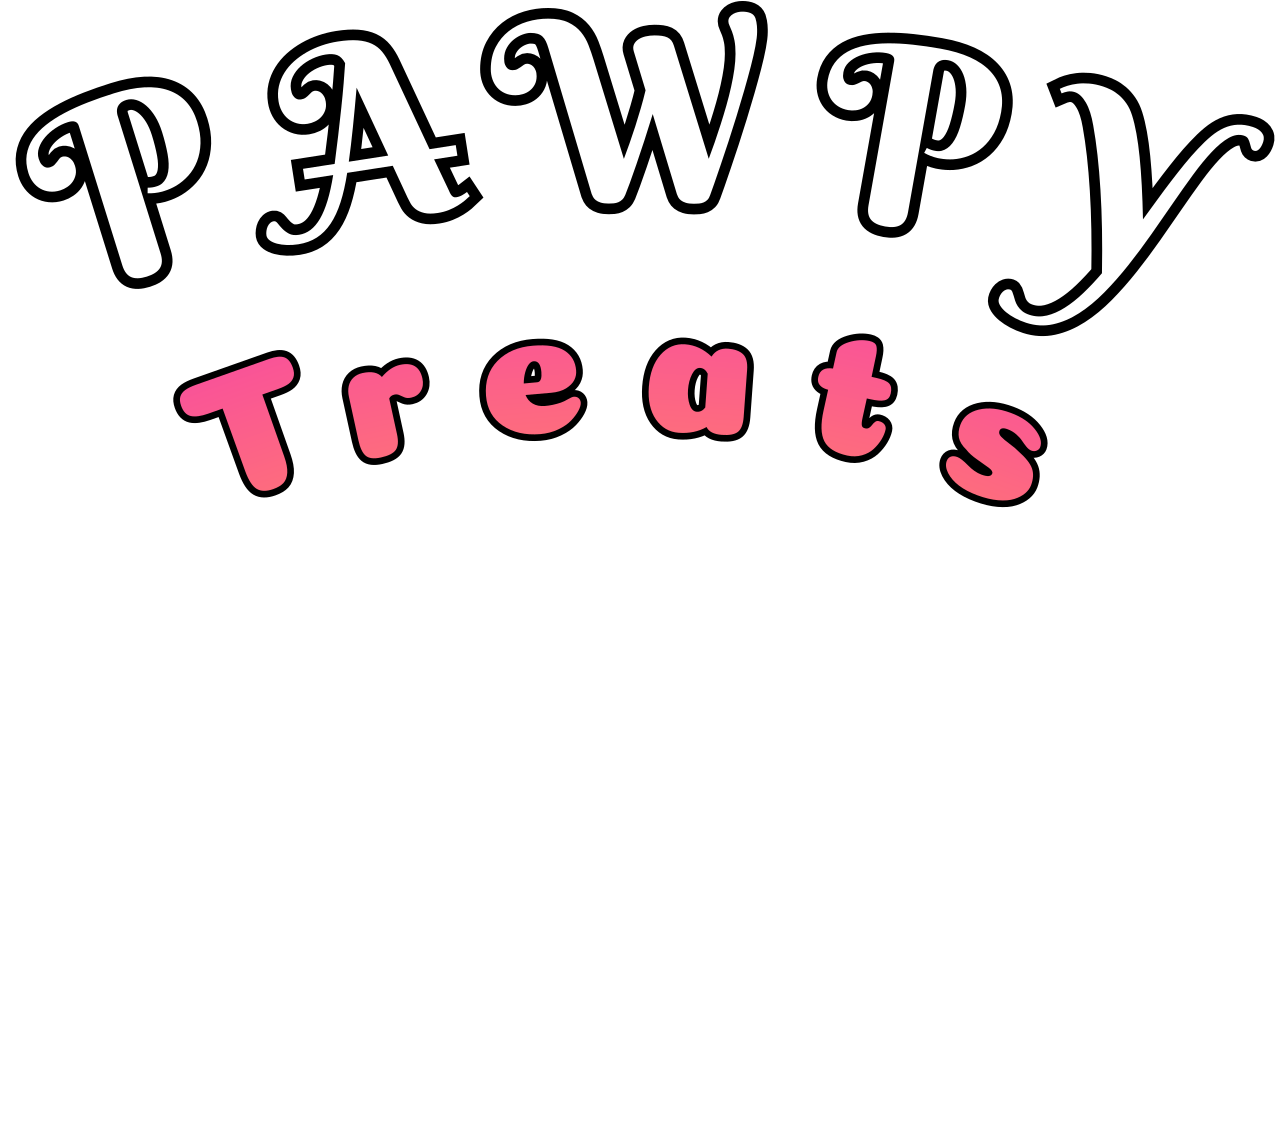 PAWPY's web page